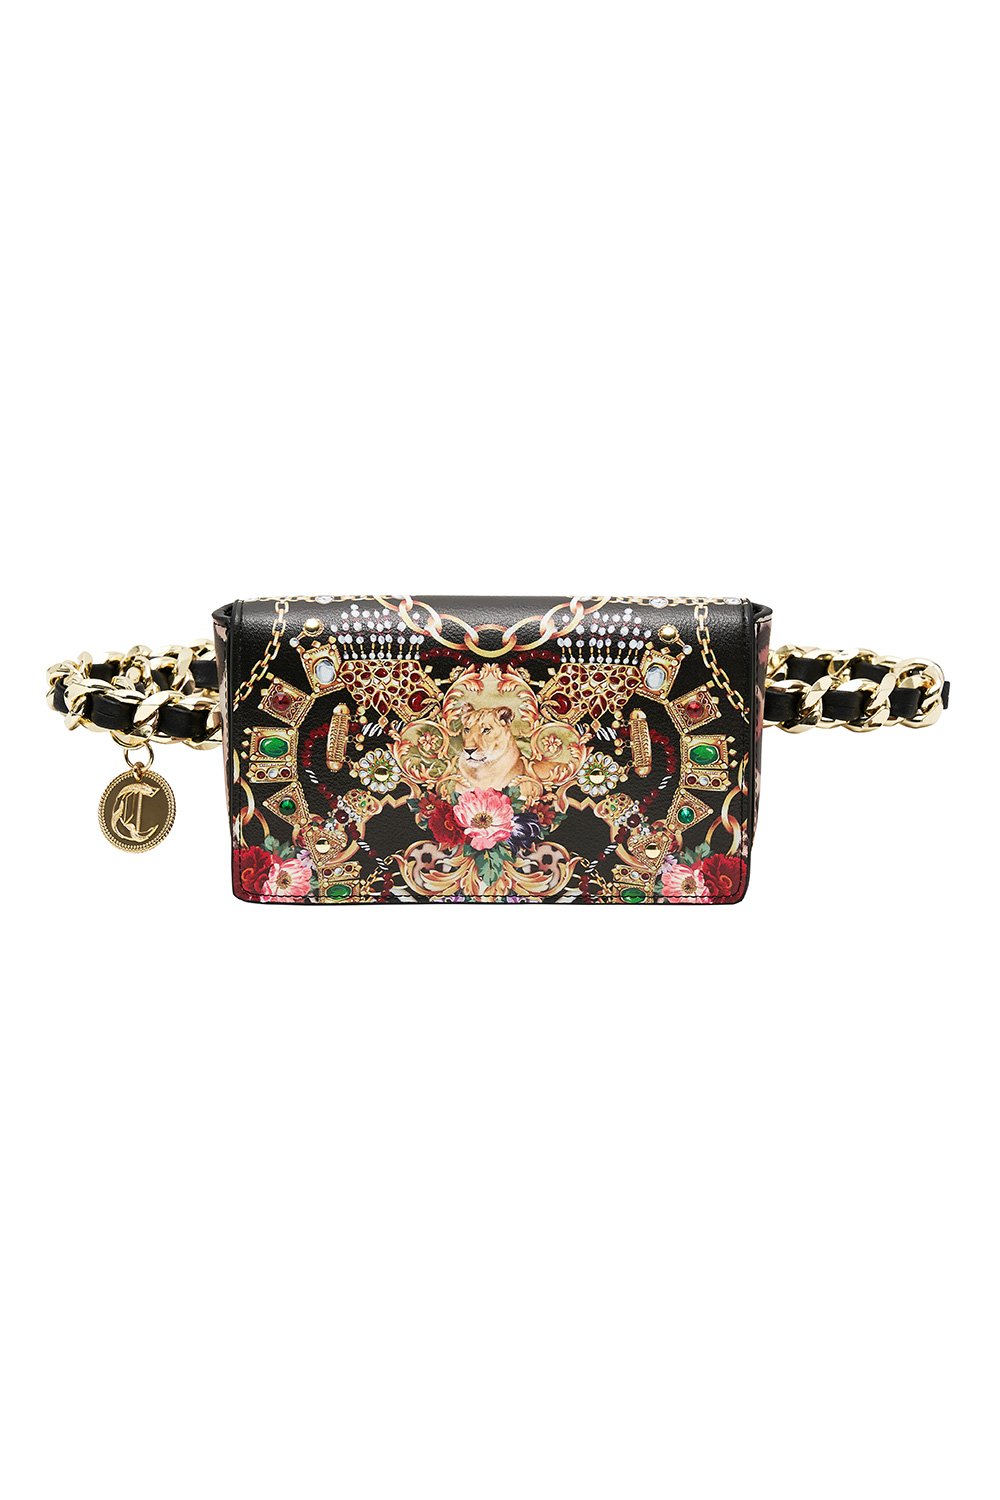 PRINTED WAIST PACK A NIGHT IN THE 90S